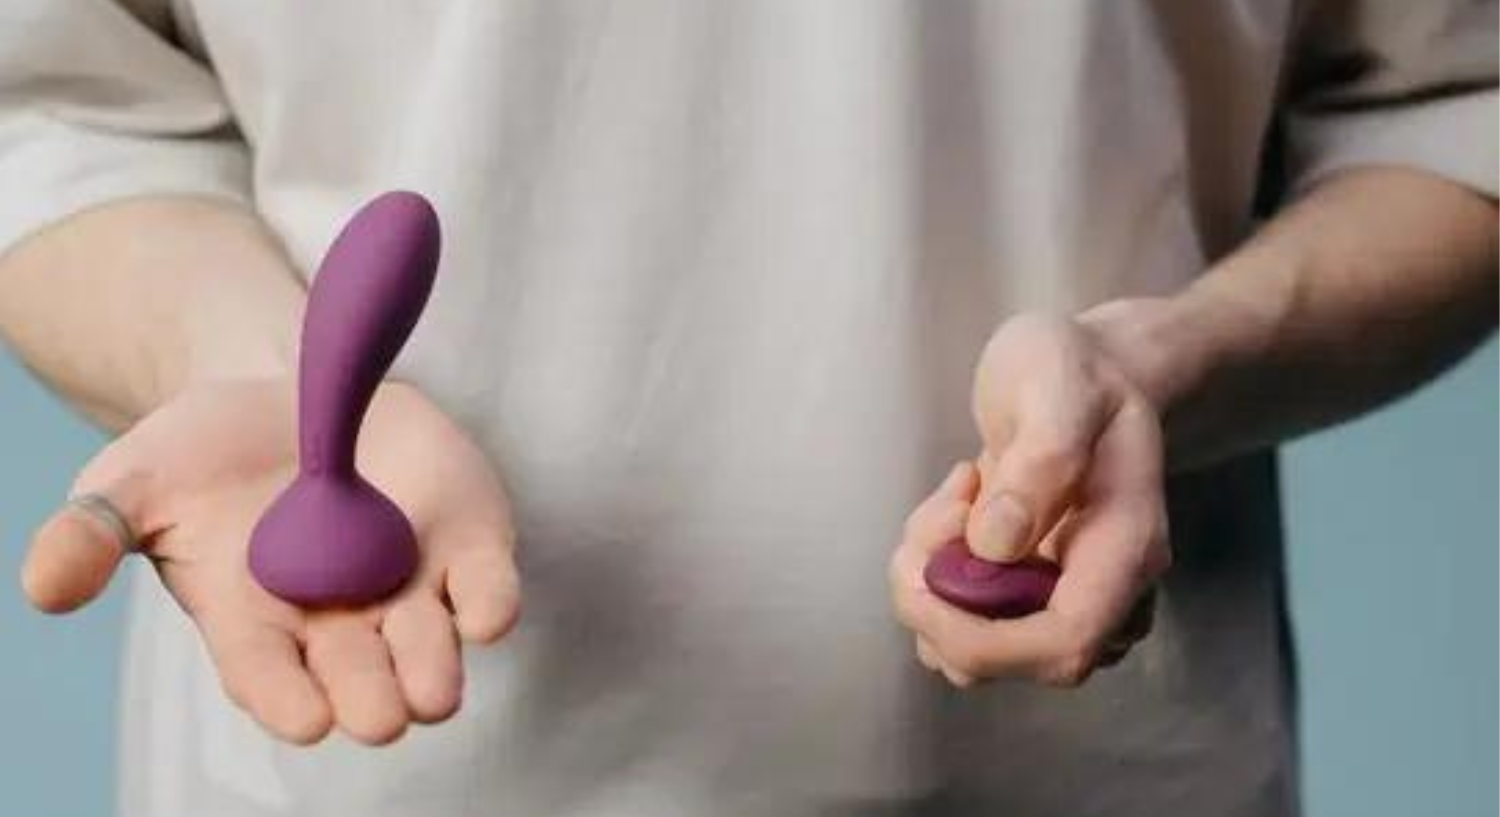 Guide to sex toys for men: Man holding a prostate massager